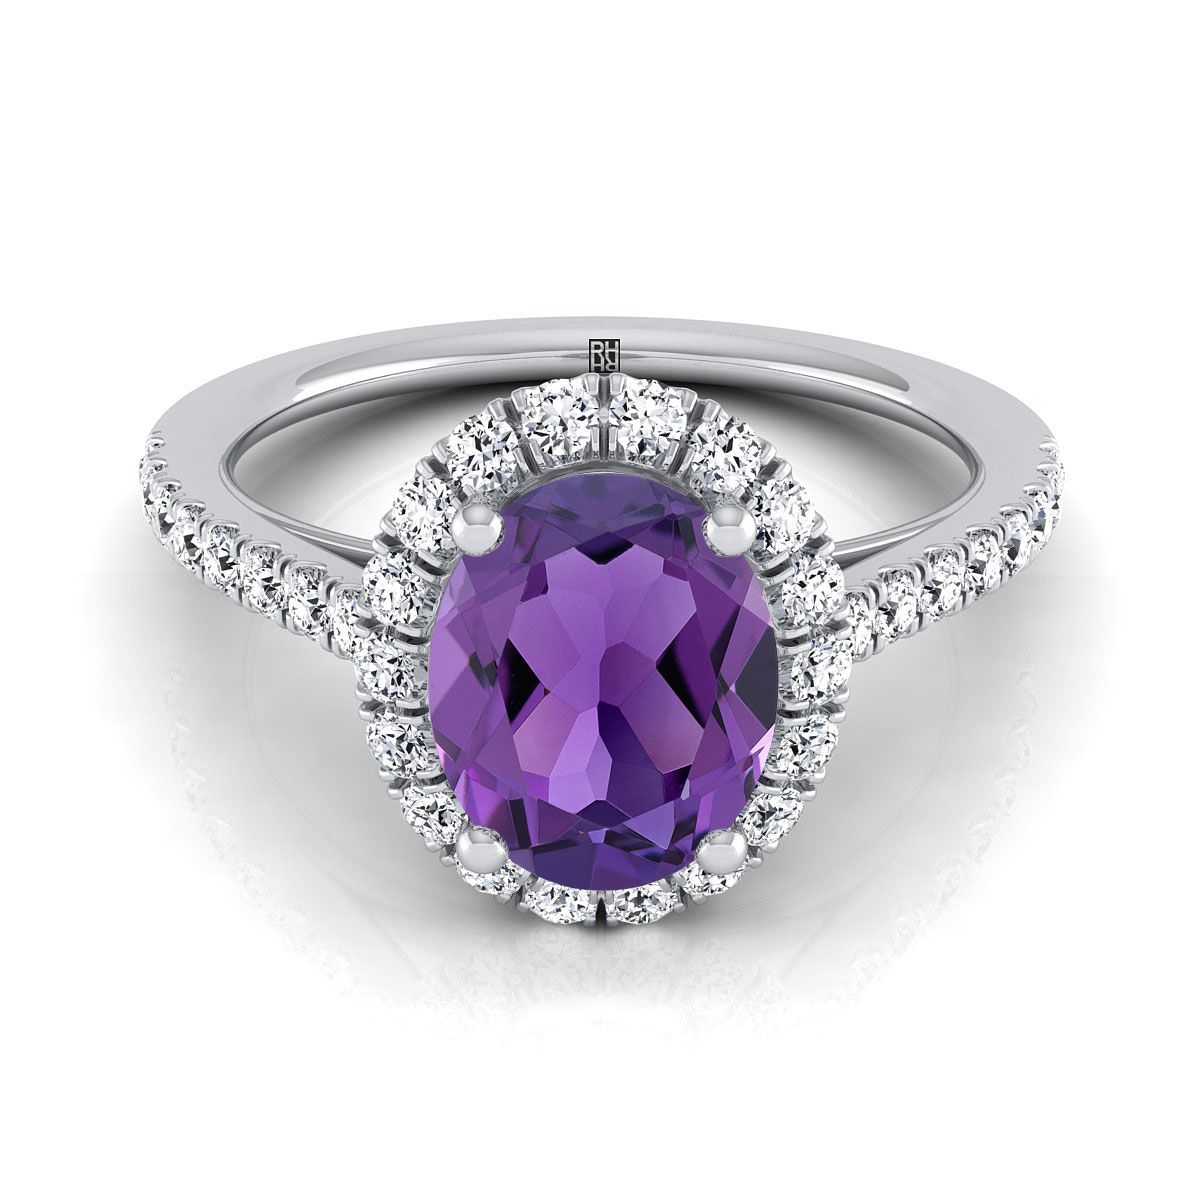 18K White Gold Oval Amethyst Petite Halo French Diamond Pave Engagement Ring -3/8ctw